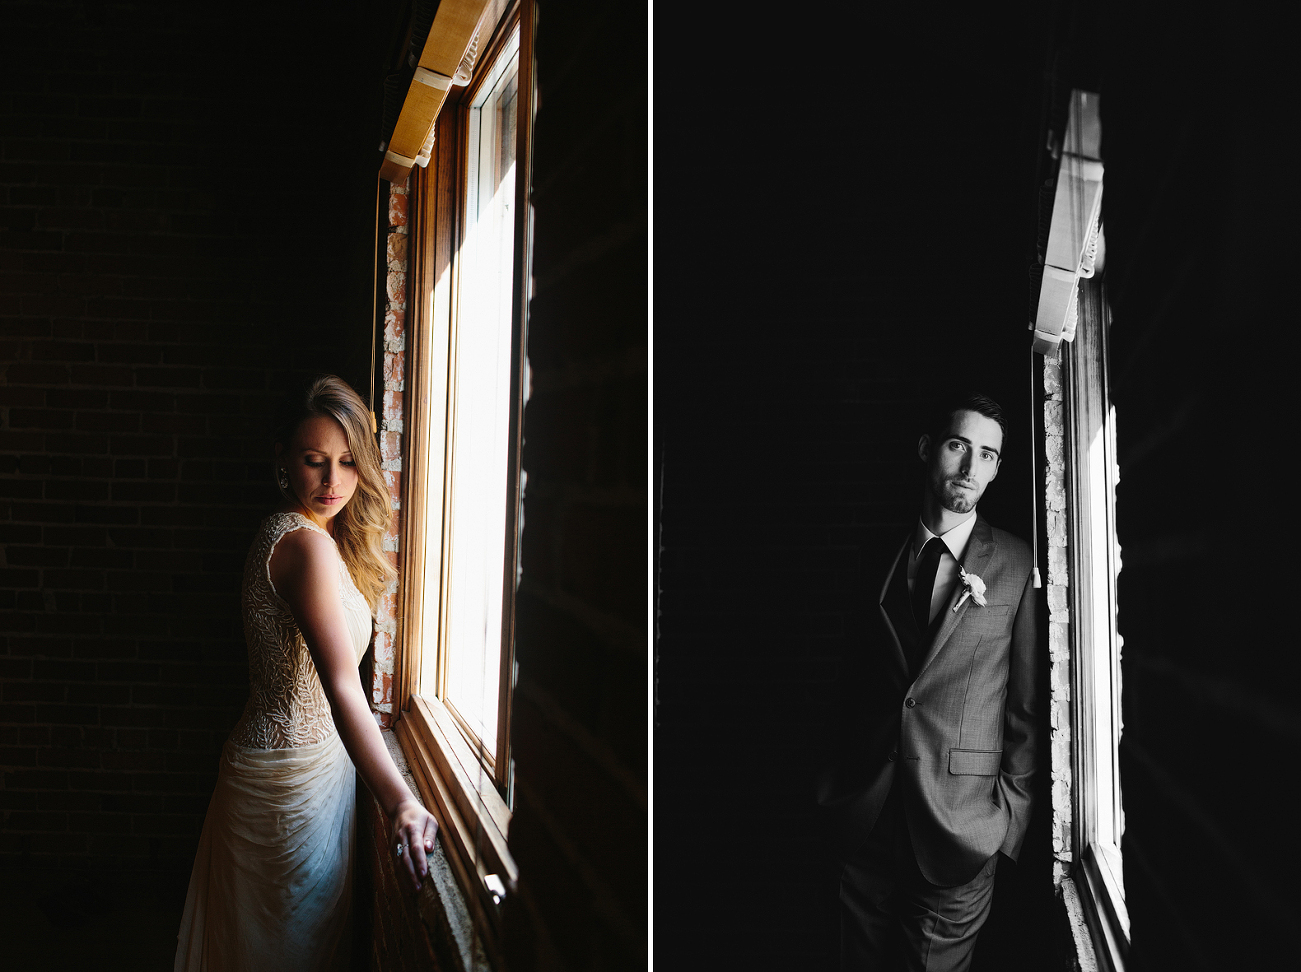 These are photos of Alannah and Evan in front of the window light.